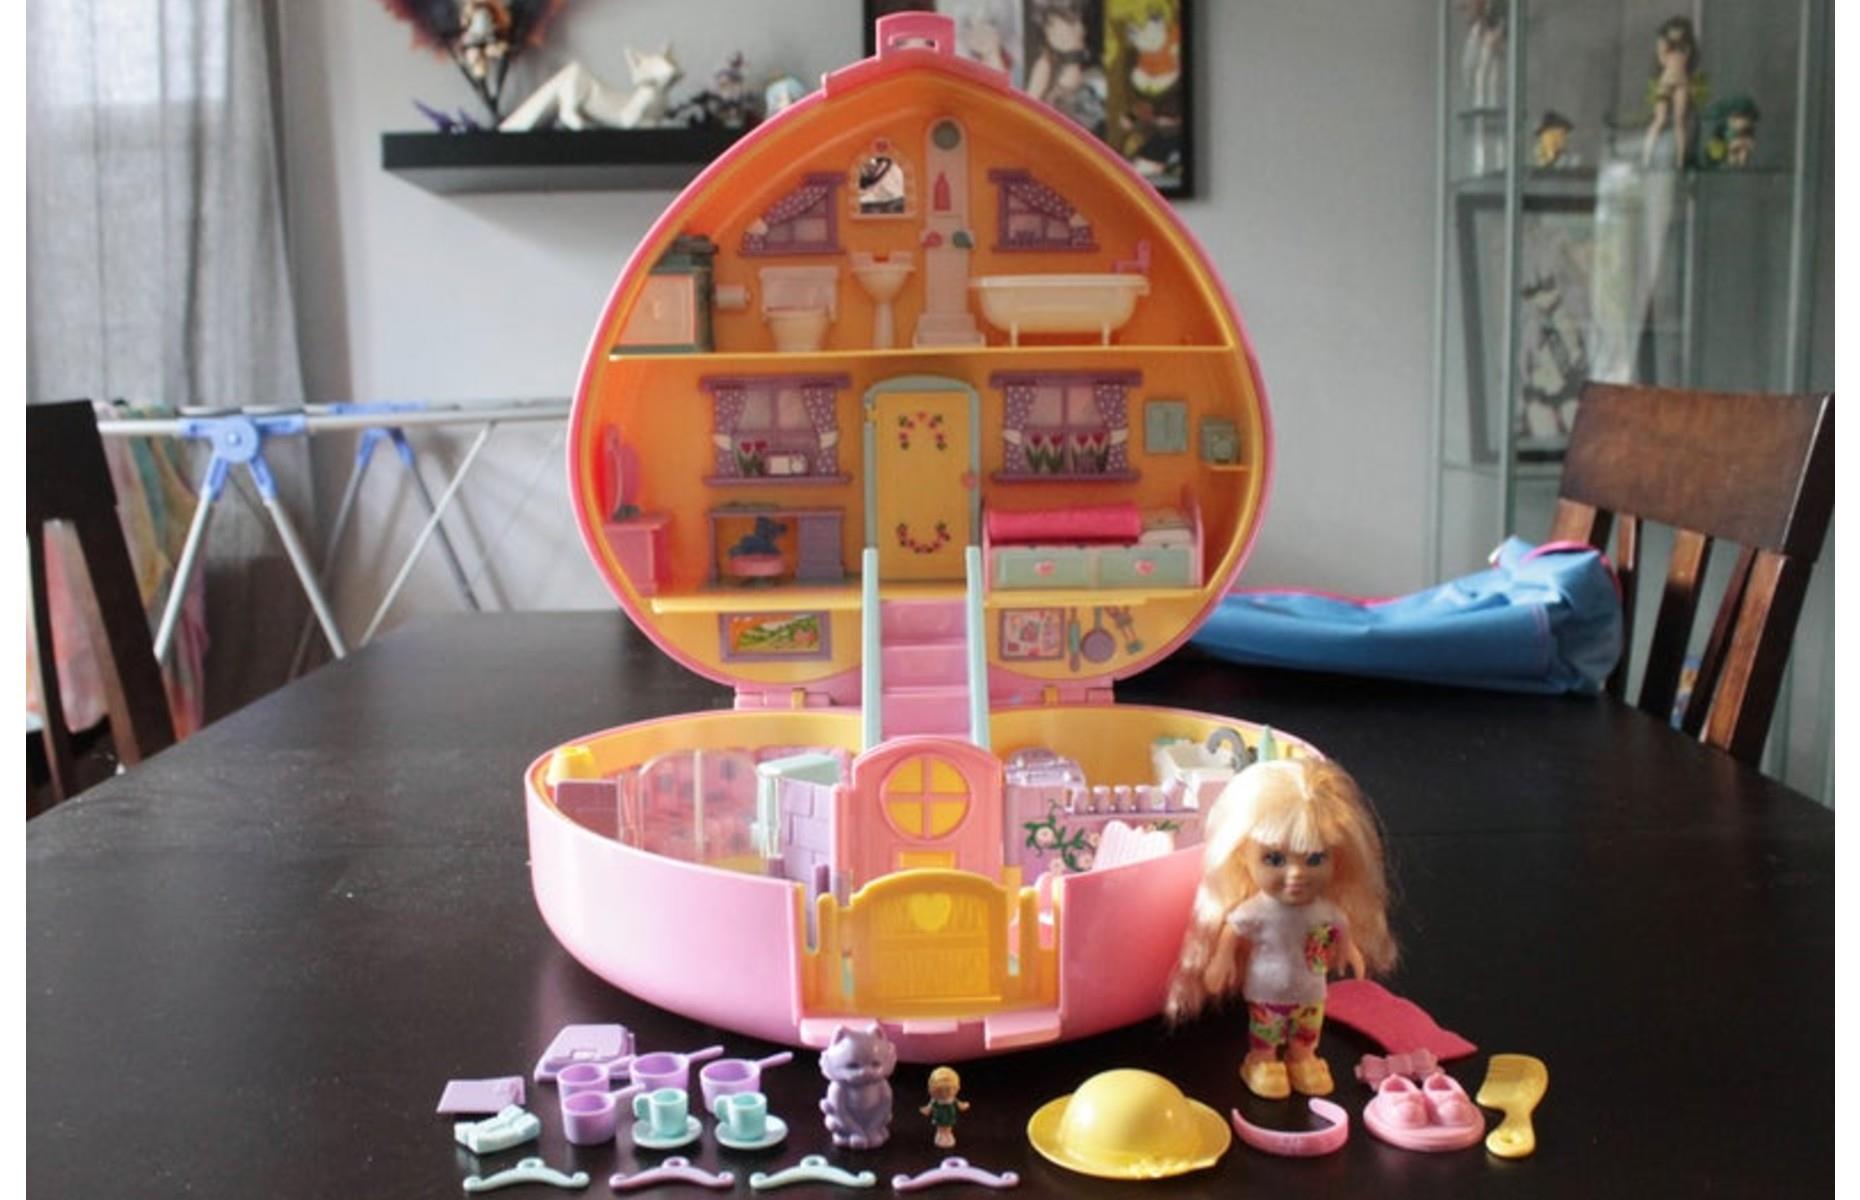 Polly Pocket Lucy Locket Carry 'N Play Dream Home: $275 (£205)